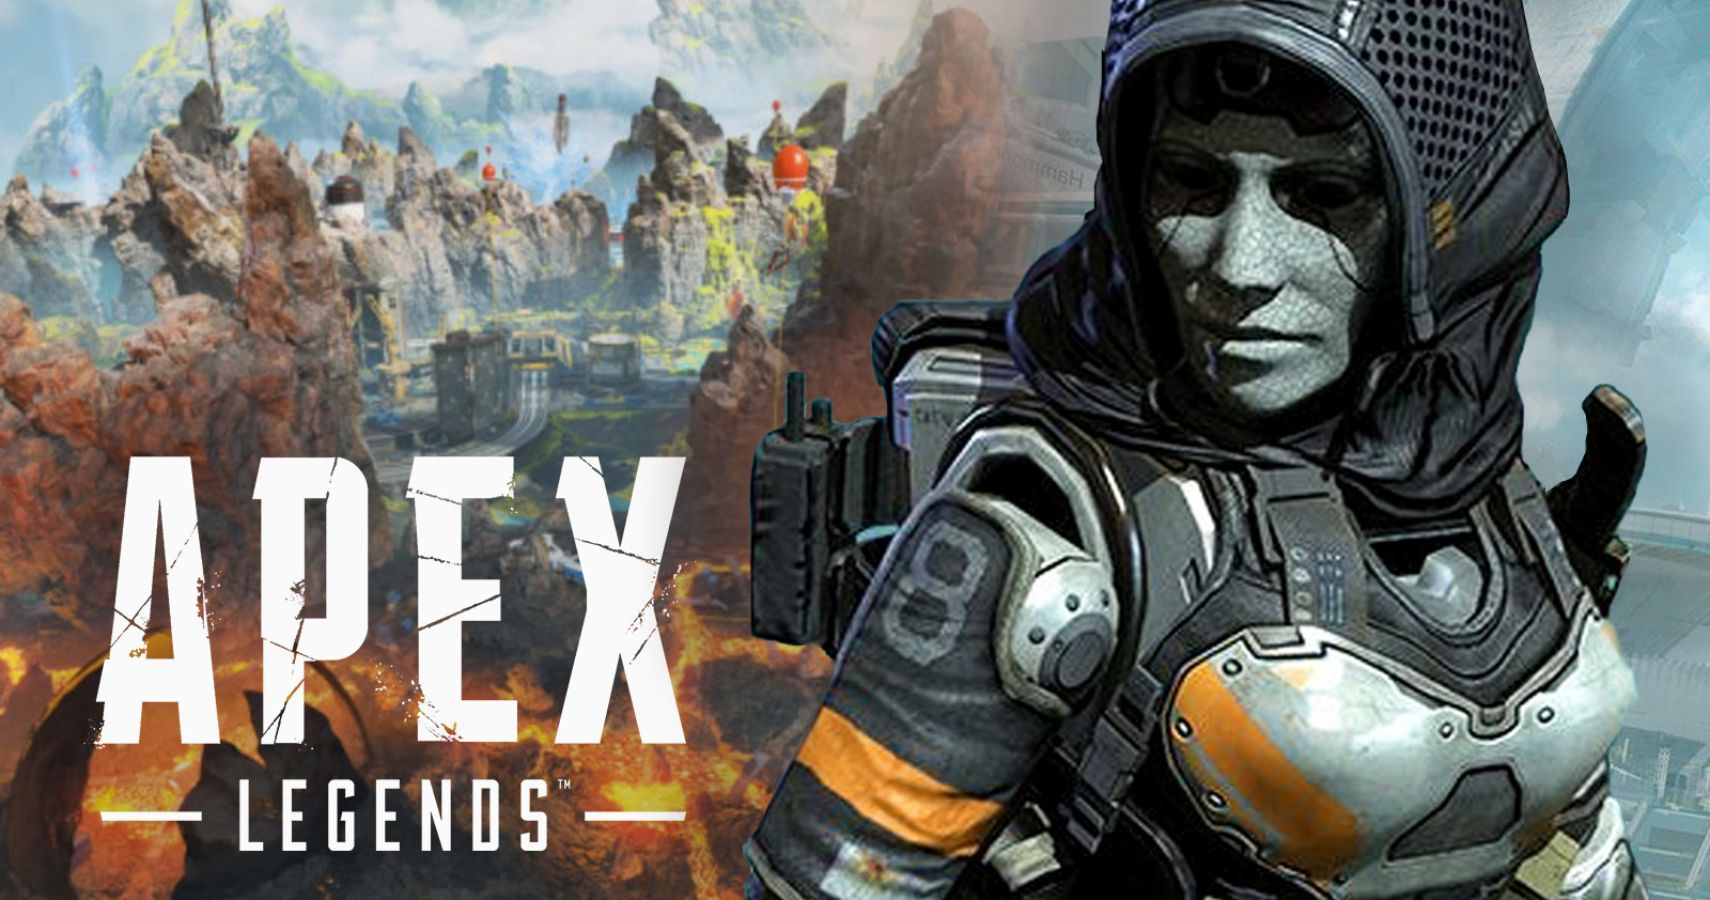 Apex Legends Legacy Launch Trailer Released Showcases Valkyrie And Ash